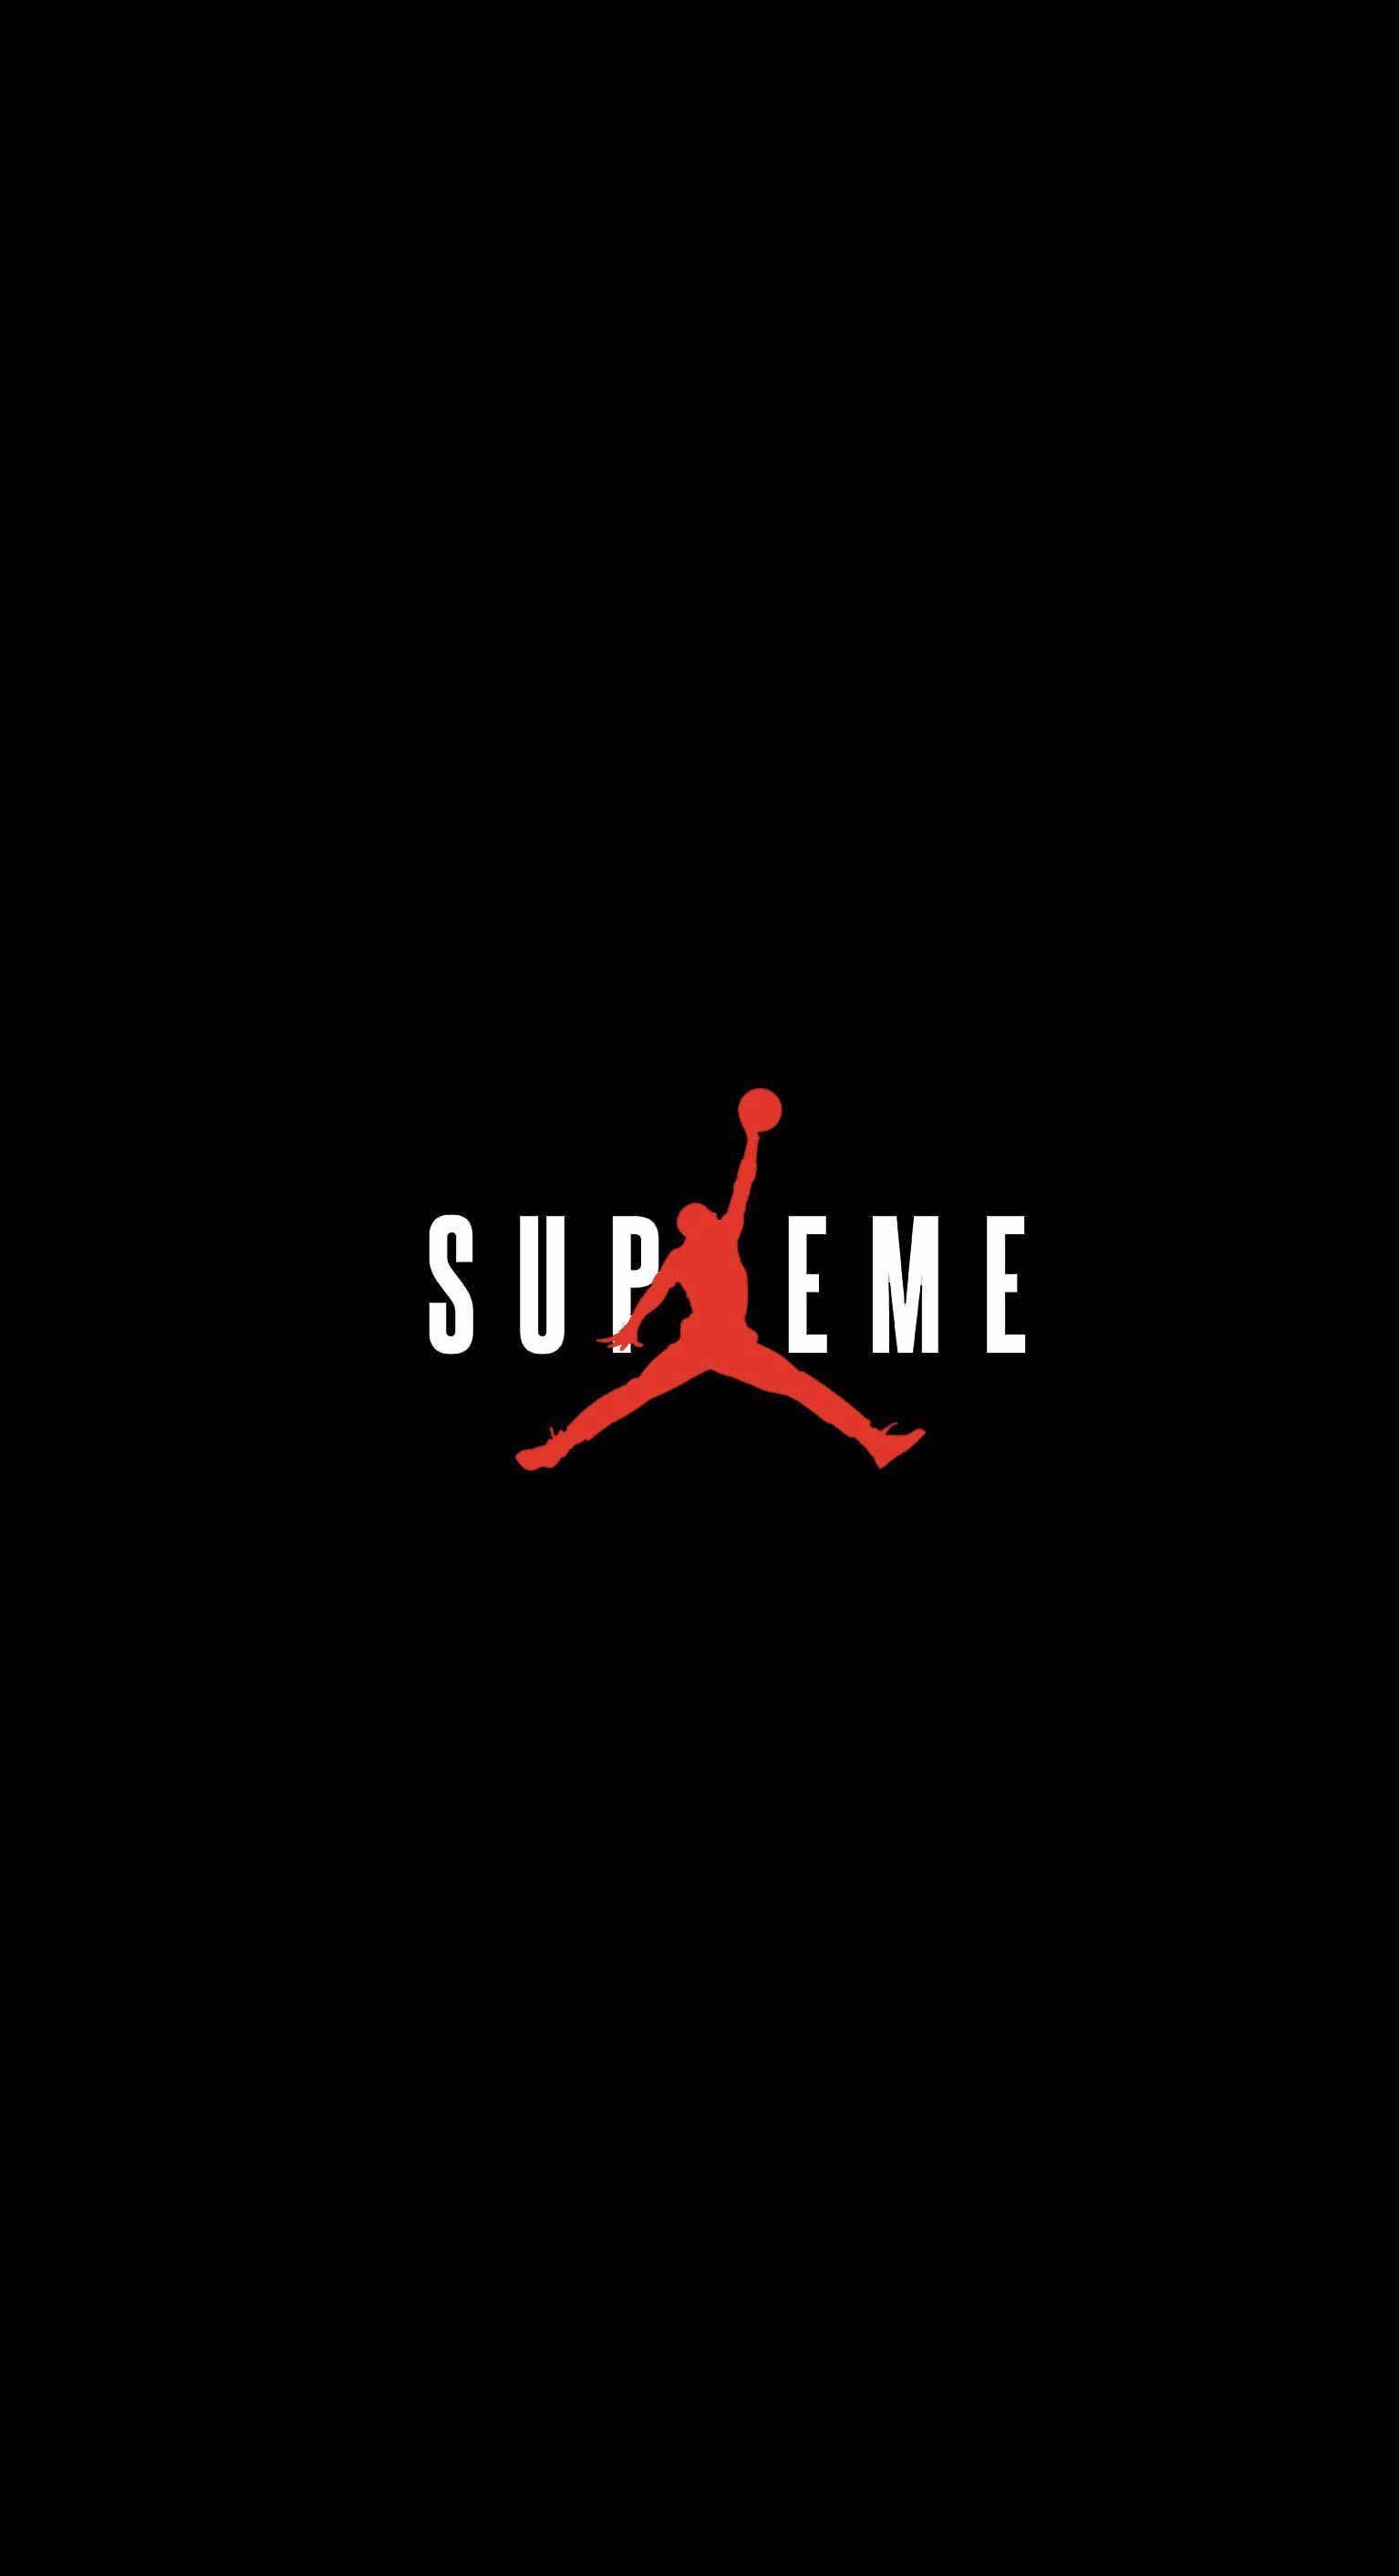 supreme-yeezy wallpaper by Anoukieee1010 - Download on ZEDGE™